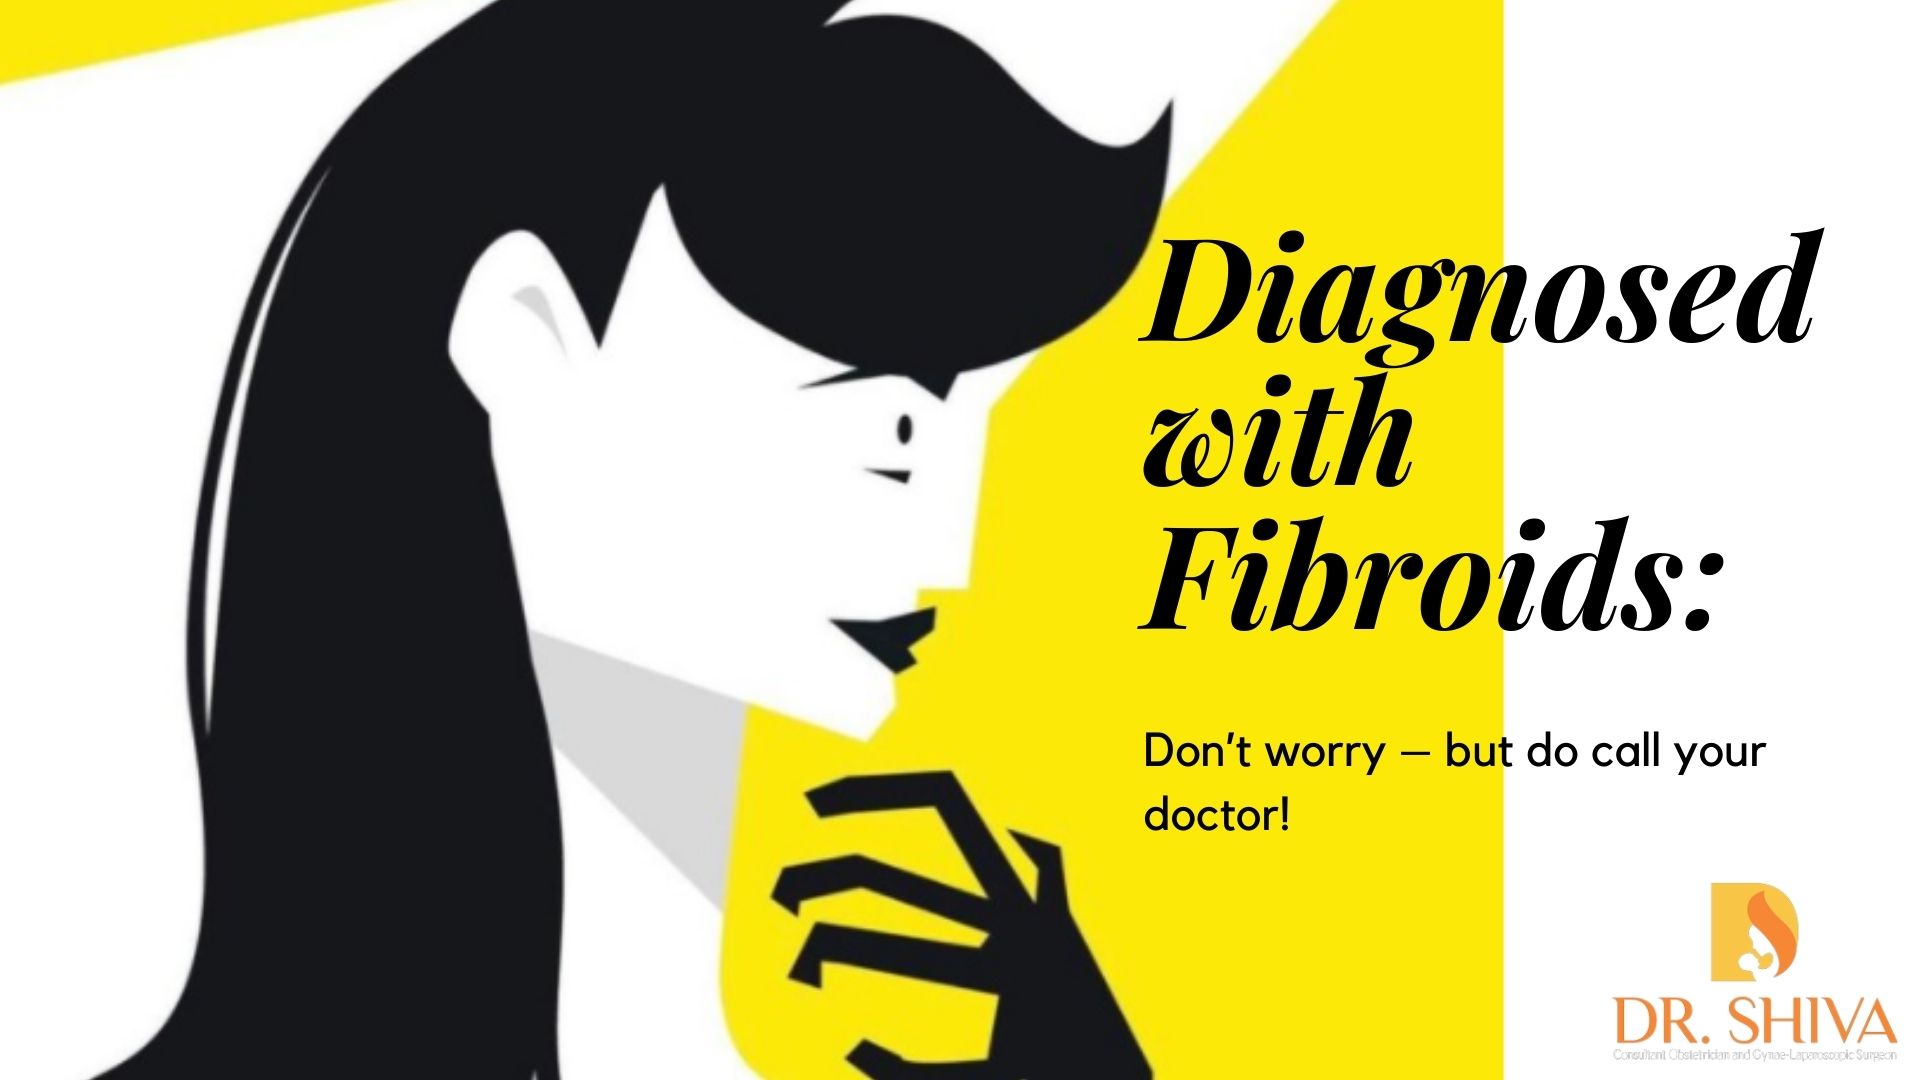 Diagnosed with Fibroids: Don’t worry – but do call your doctor!